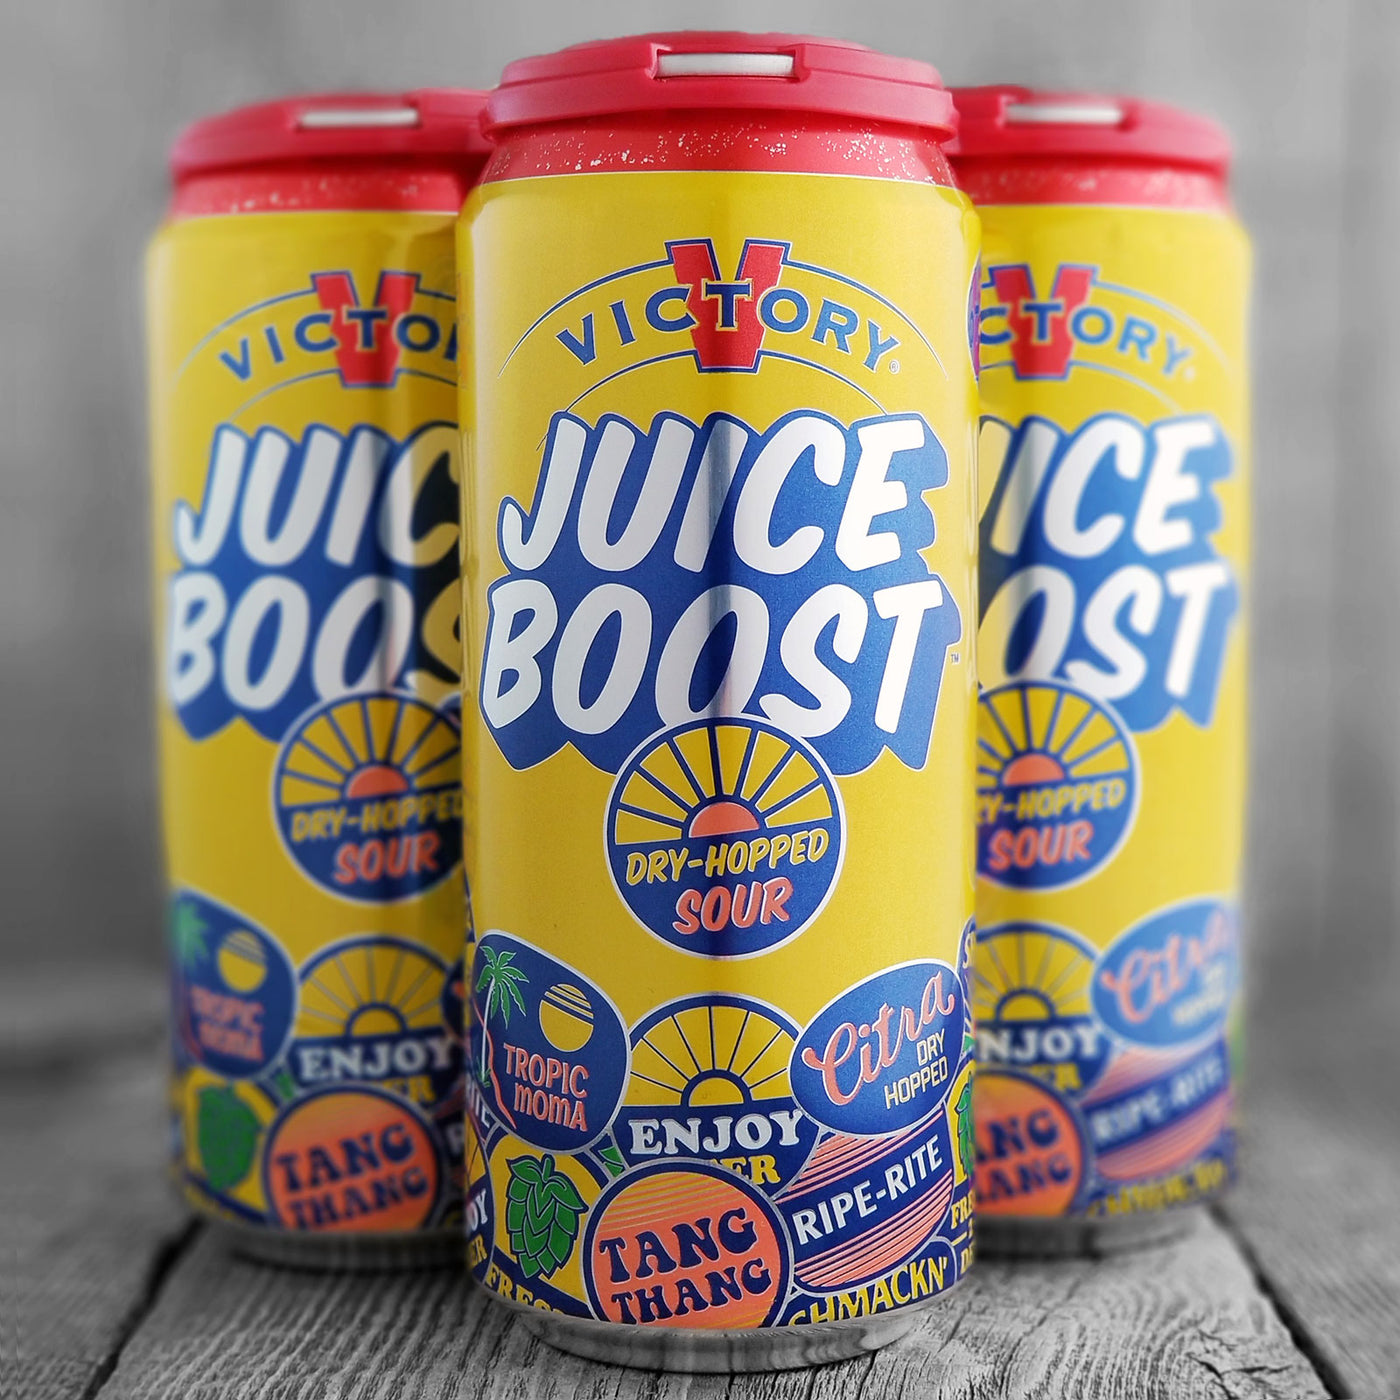 Victory Juice Boost